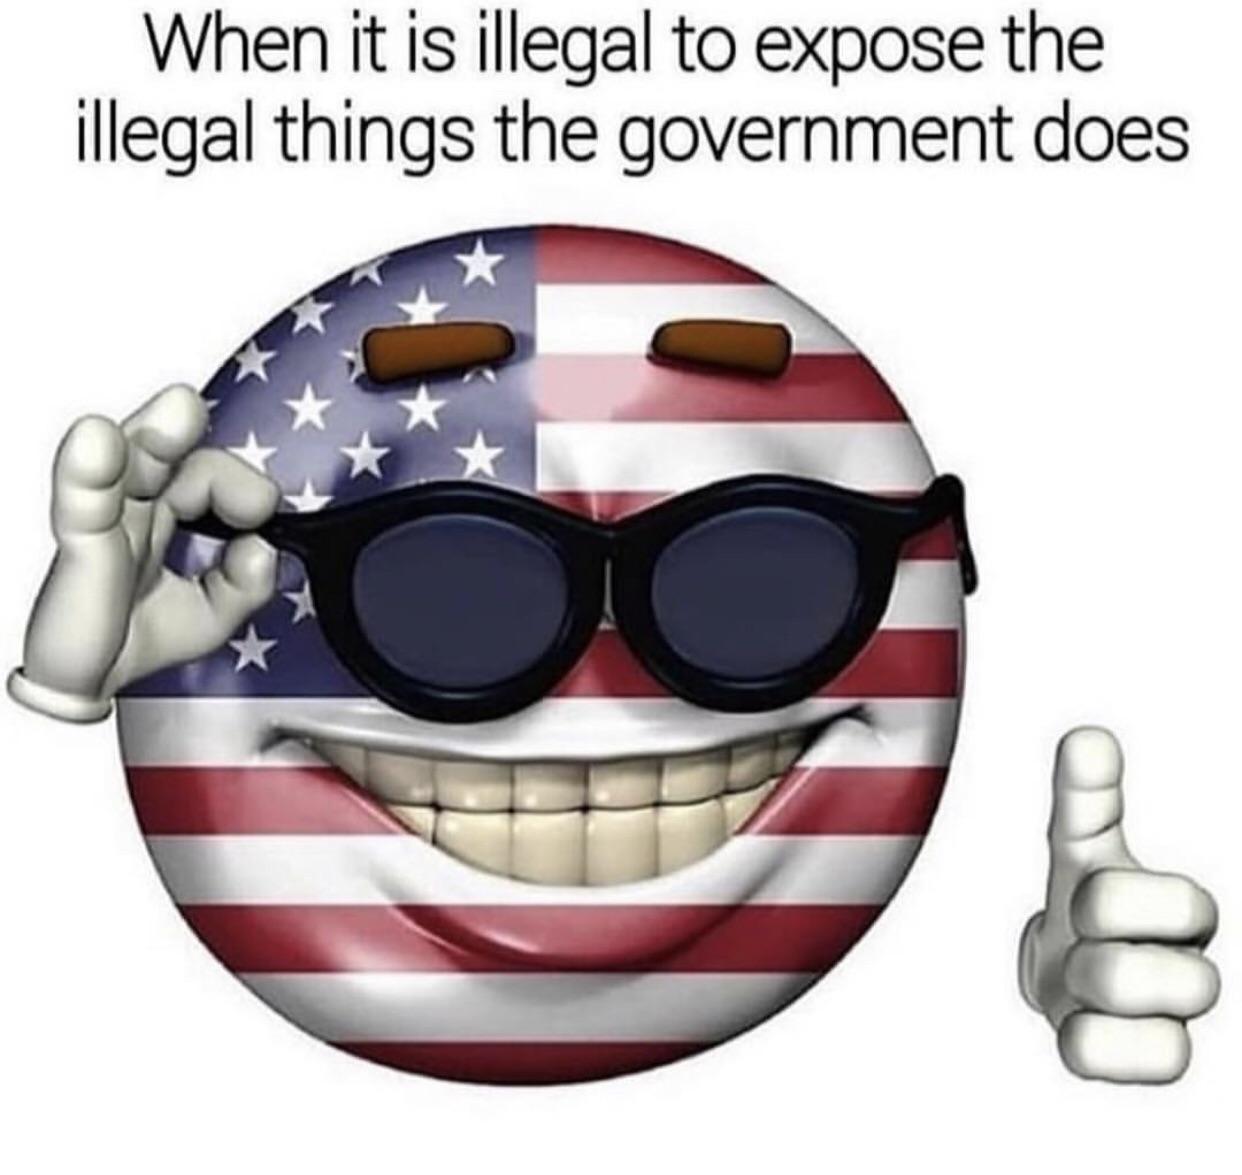 us picardia - When it is illegal to expose the illegal things the government does